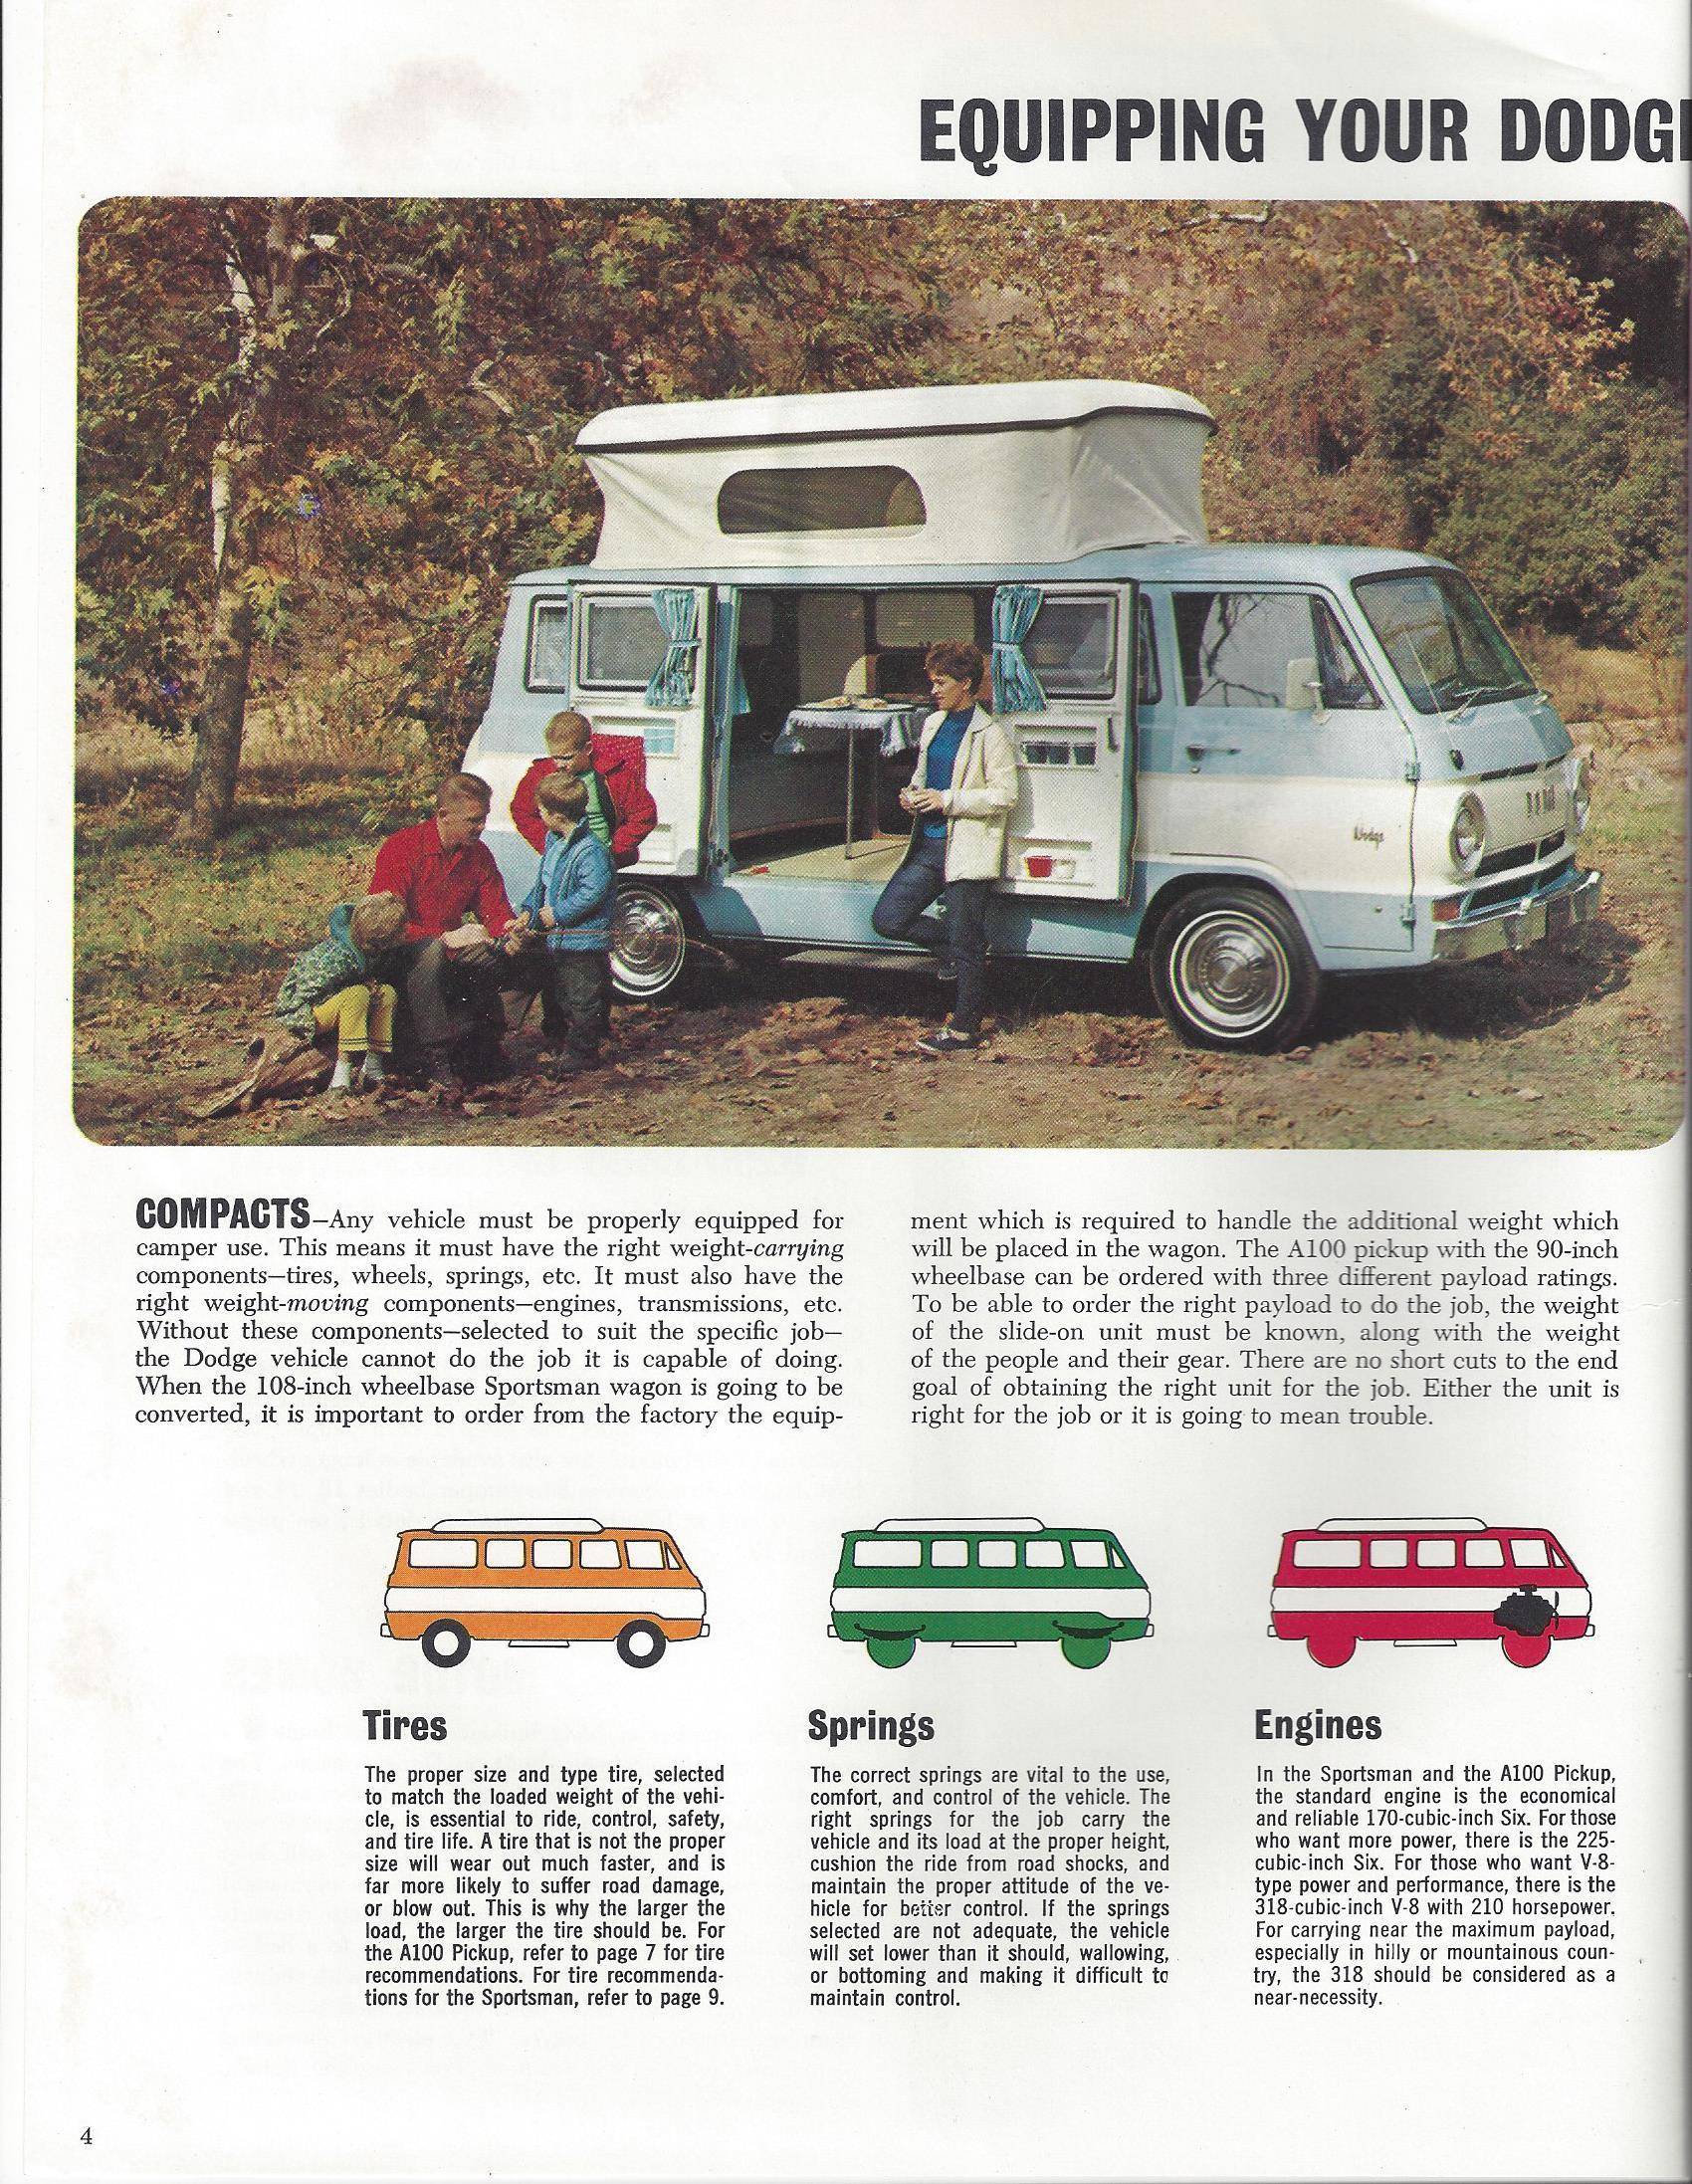 Go Camping With Dodge - pg 04.jpg